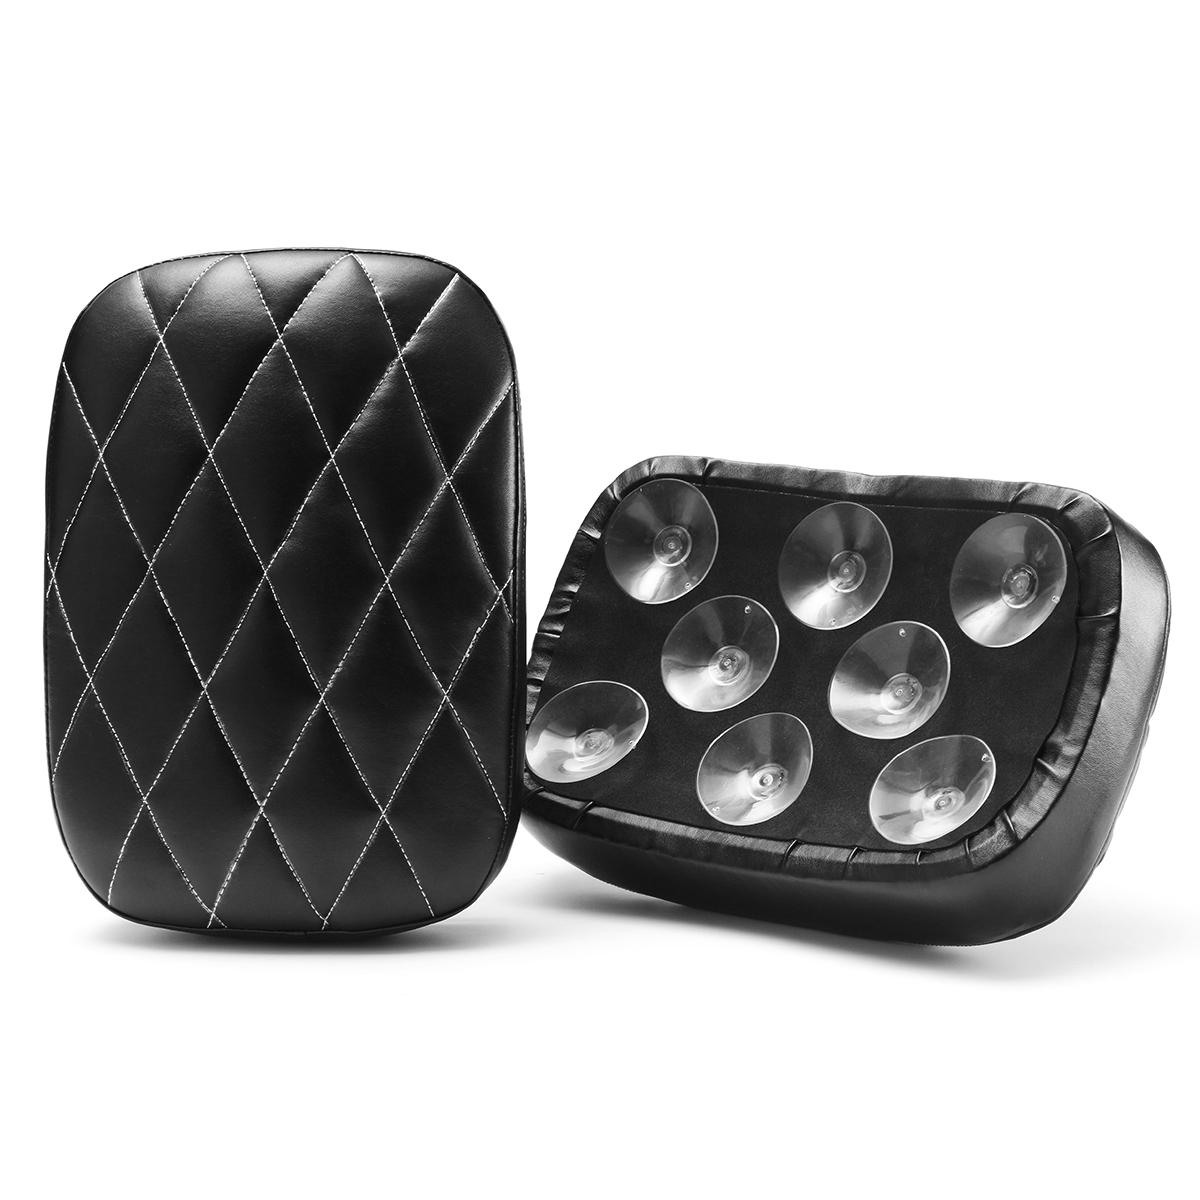 Rear Passenger Pillion Leather Seat Pad 6Suction 8 Suction Cup For Harley Softail Dyna